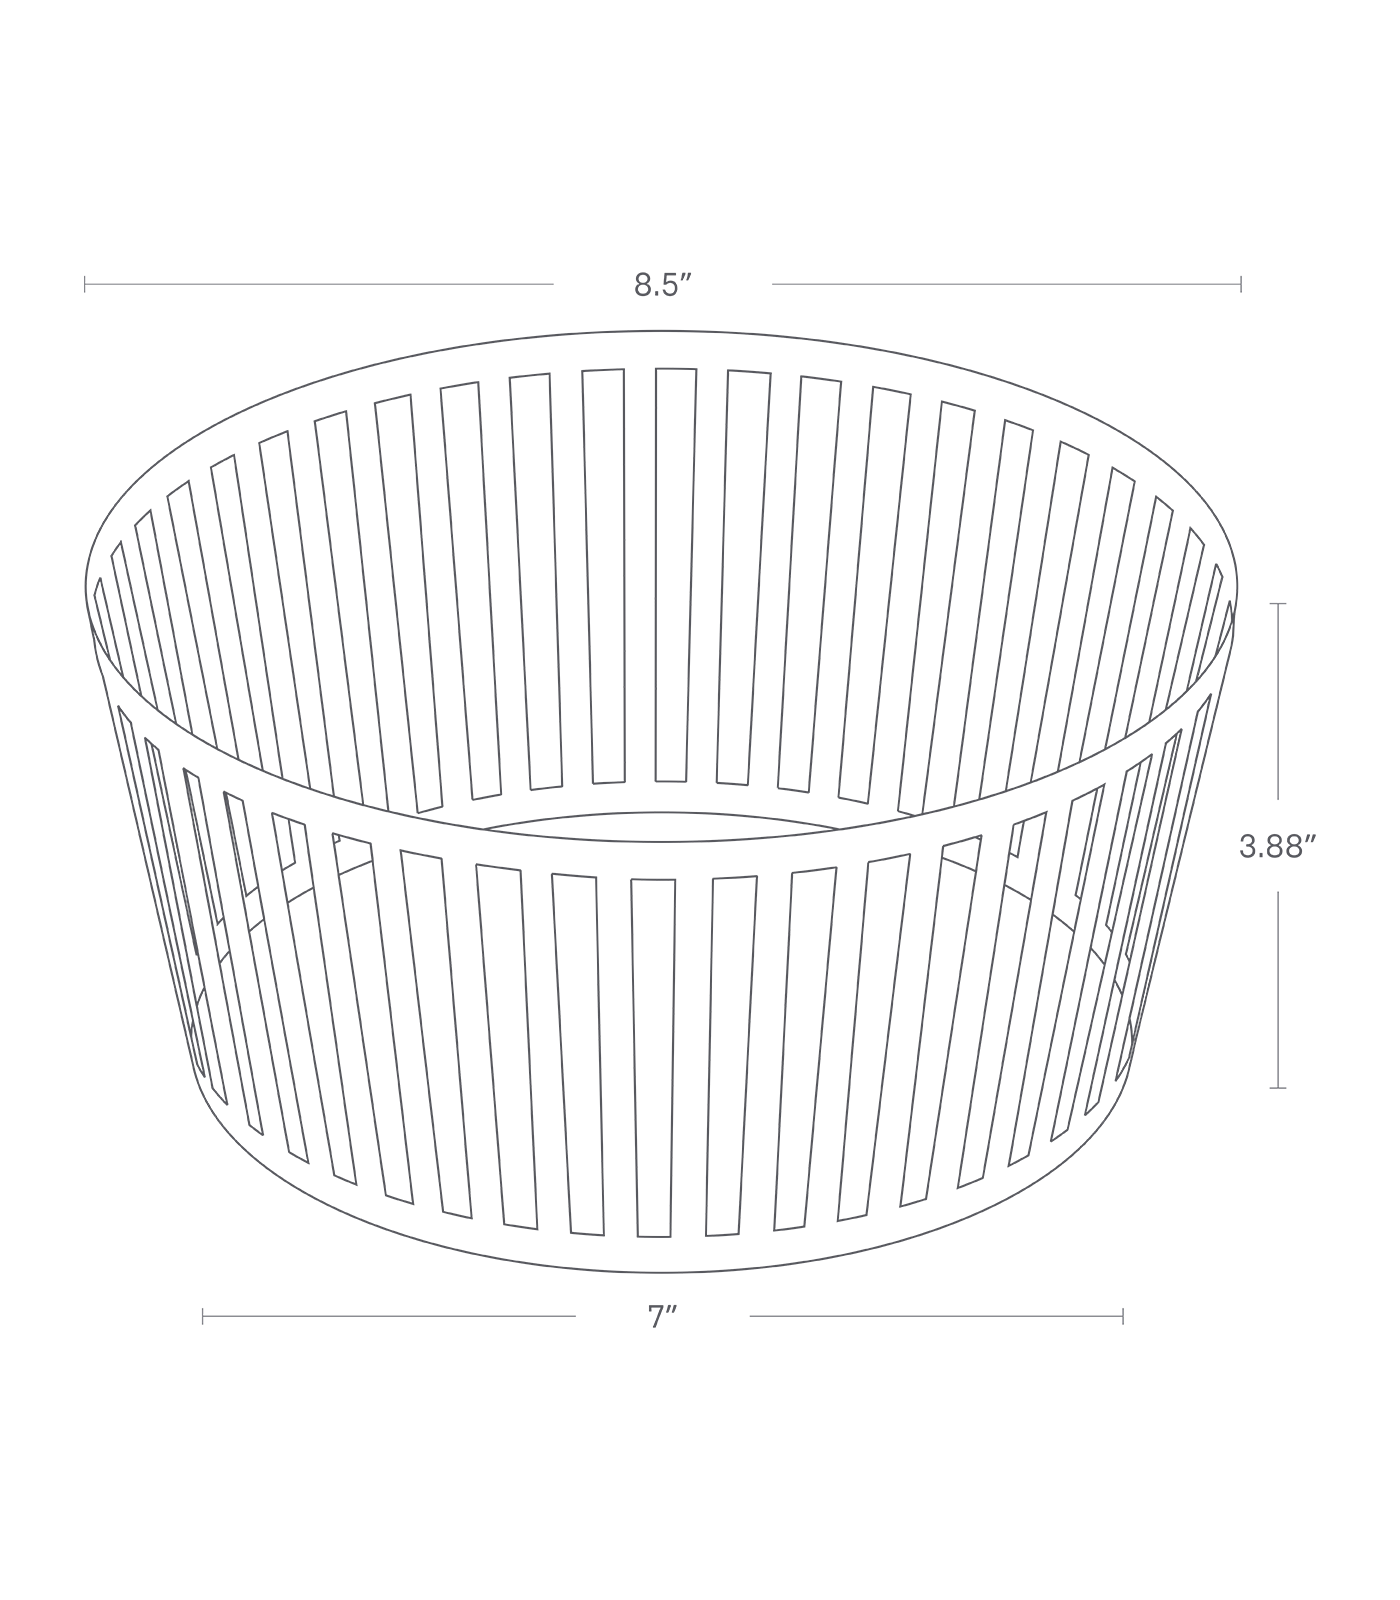 Dimension image for Fruit Basket - Two Sizes on a white background including dimensions  L 8.46 x W 8.46 x H 3.94 inches